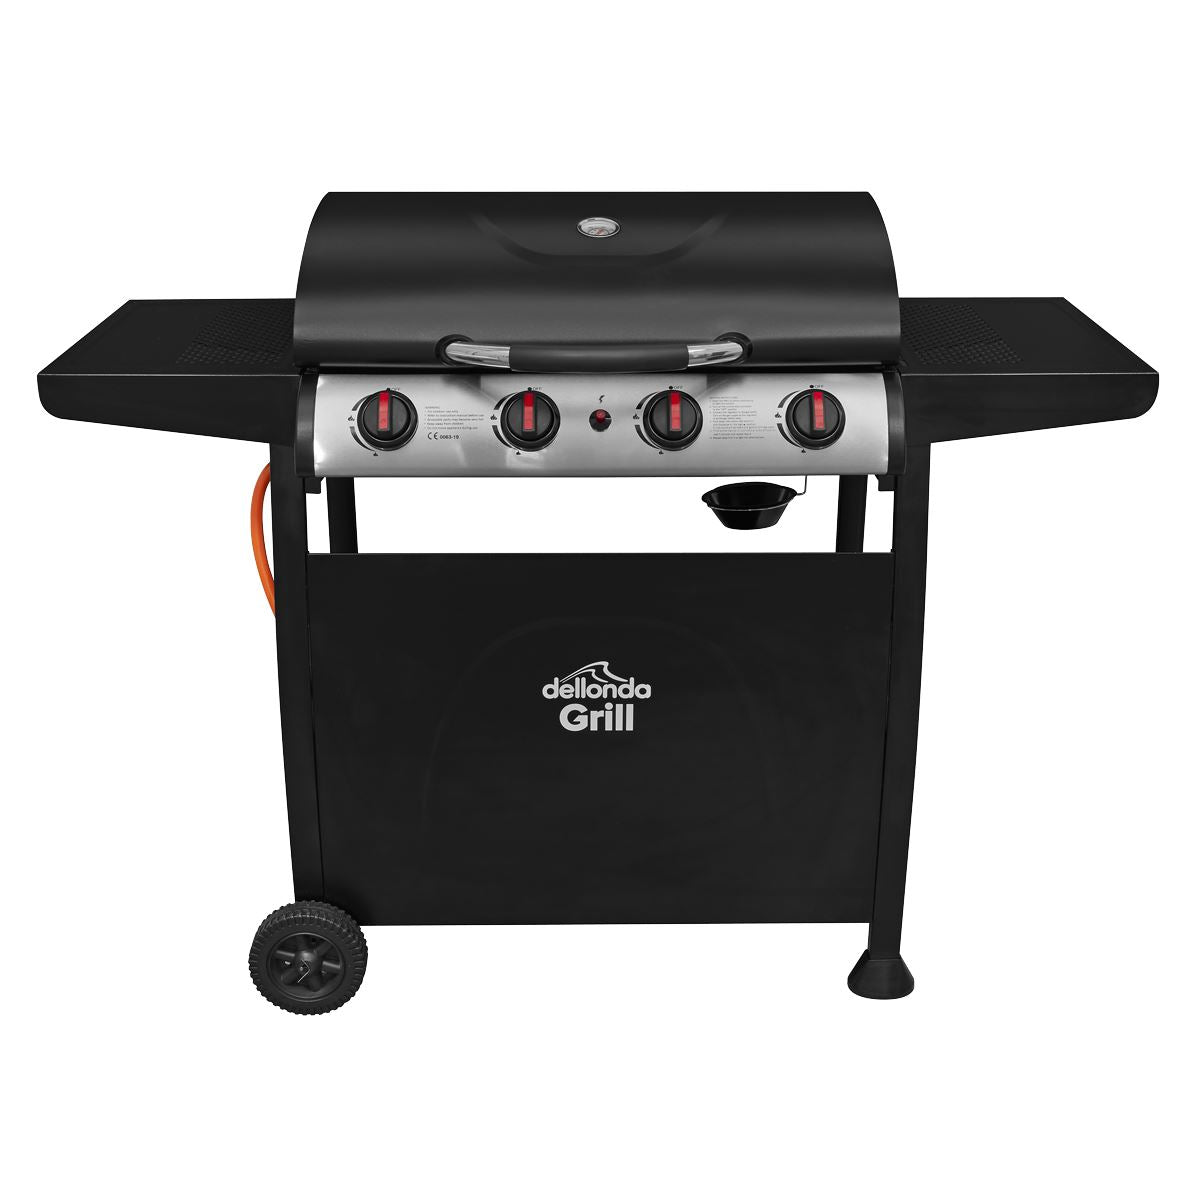 Dellonda 4 Burner Gas BBQ Grill, Ignition, Thermometer, Black/Stainless Steel